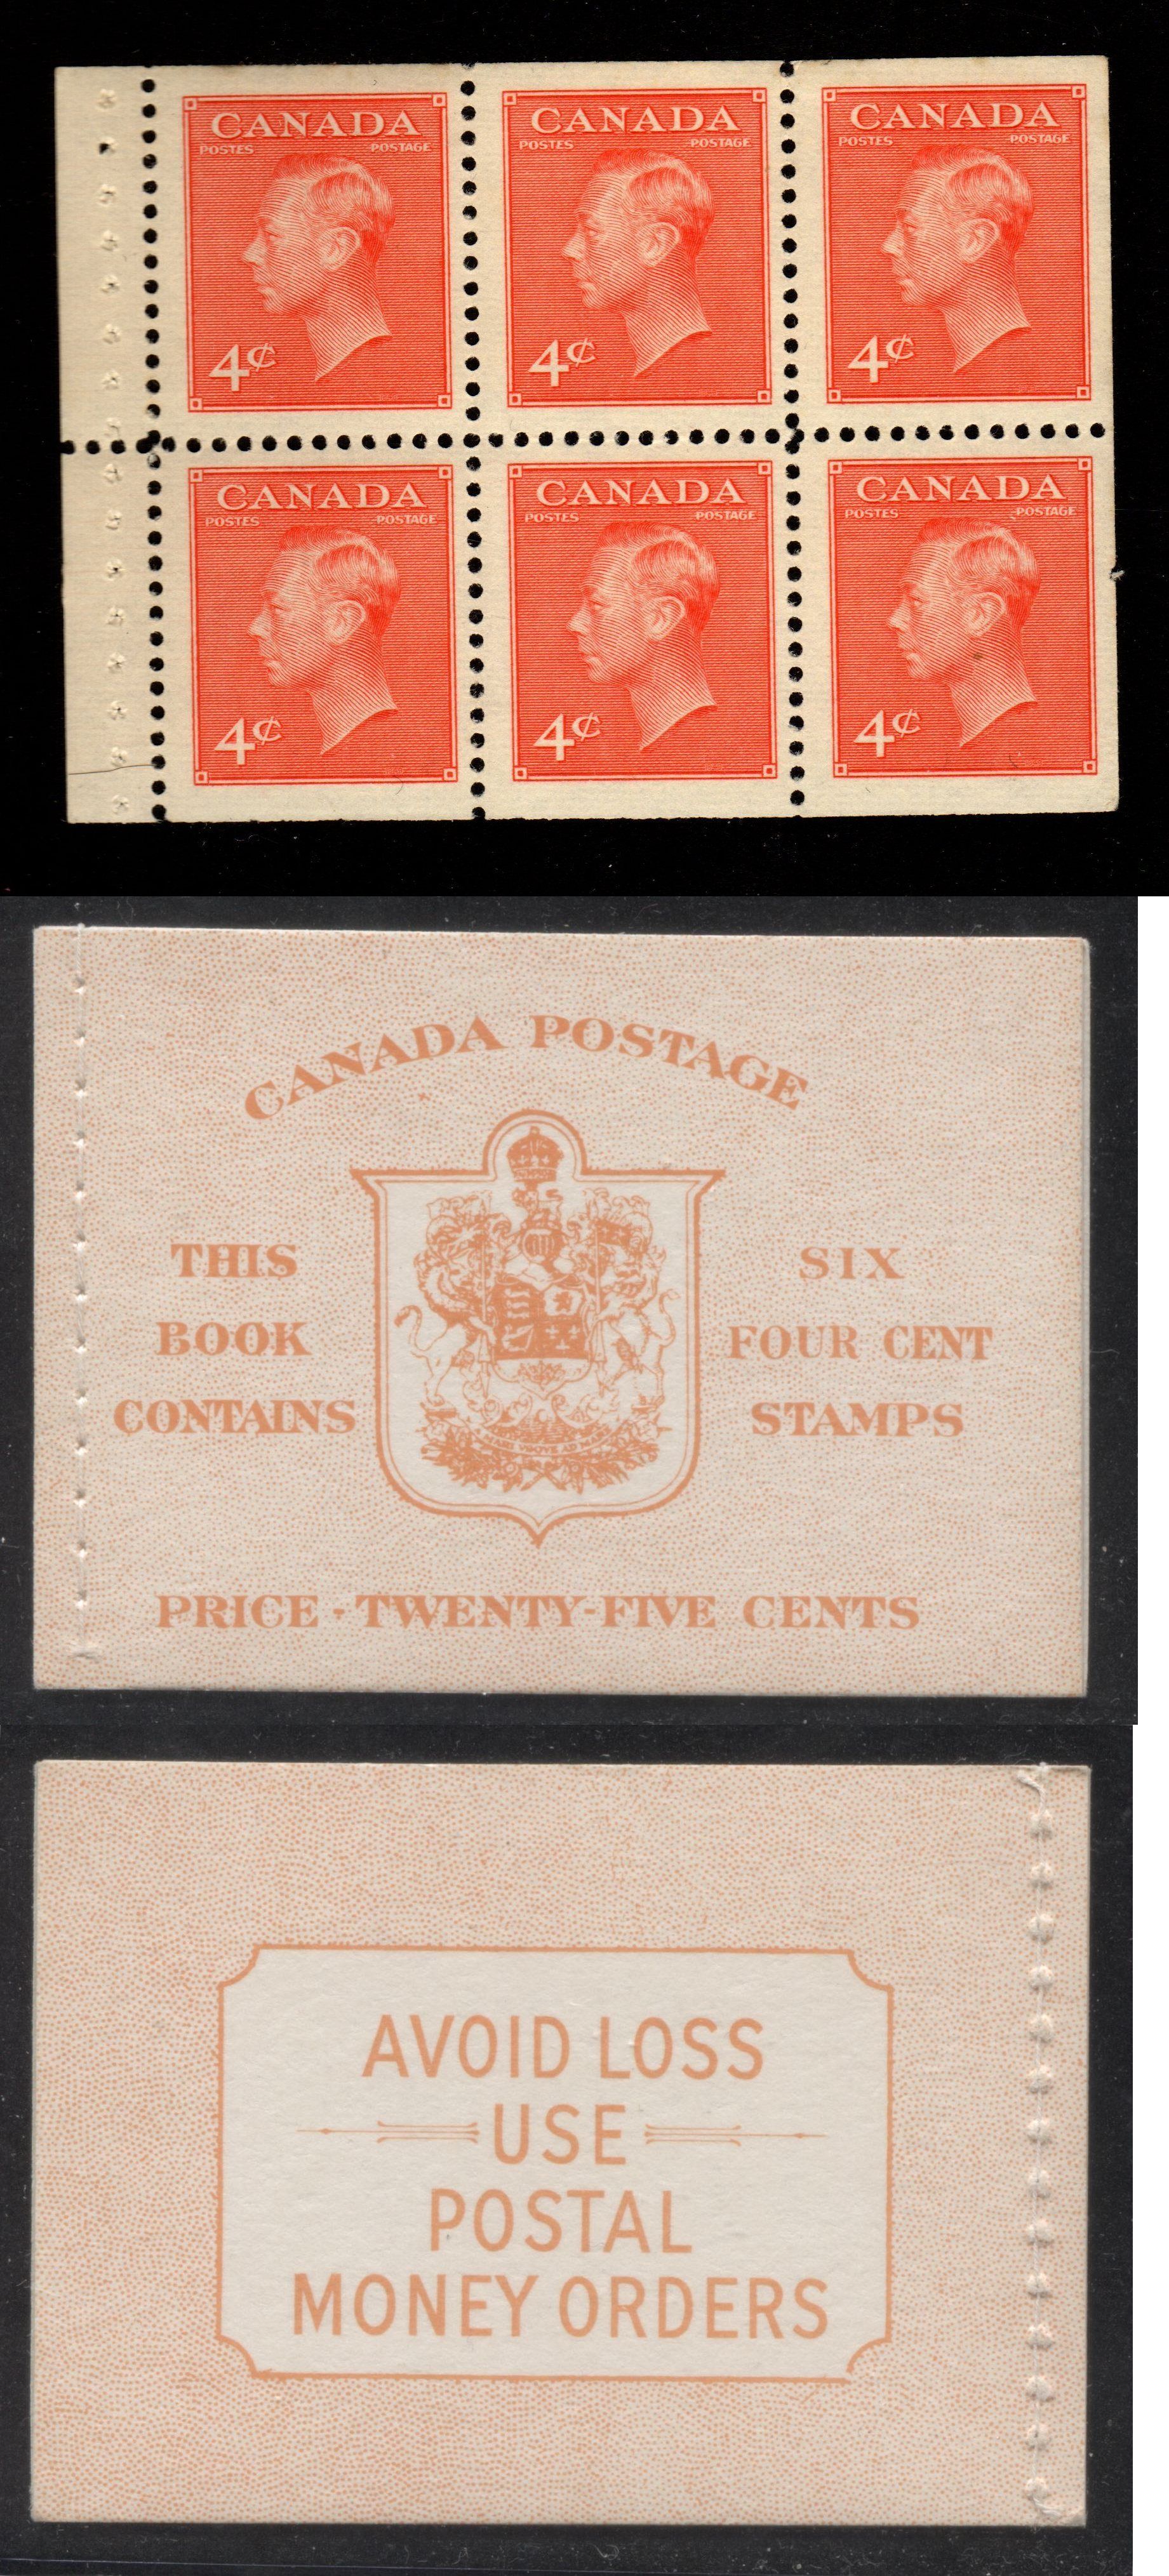 Canada #BK42b 1949-1953 Postes-Postage Issue Complete 25c, English Booklet Containing 1 Pane of 6 of the 4c Orange King George VI Harris Front Cover Type IIi , Back Cover Ei, No Rate Page, Stitched Binding Brixton Chrome 